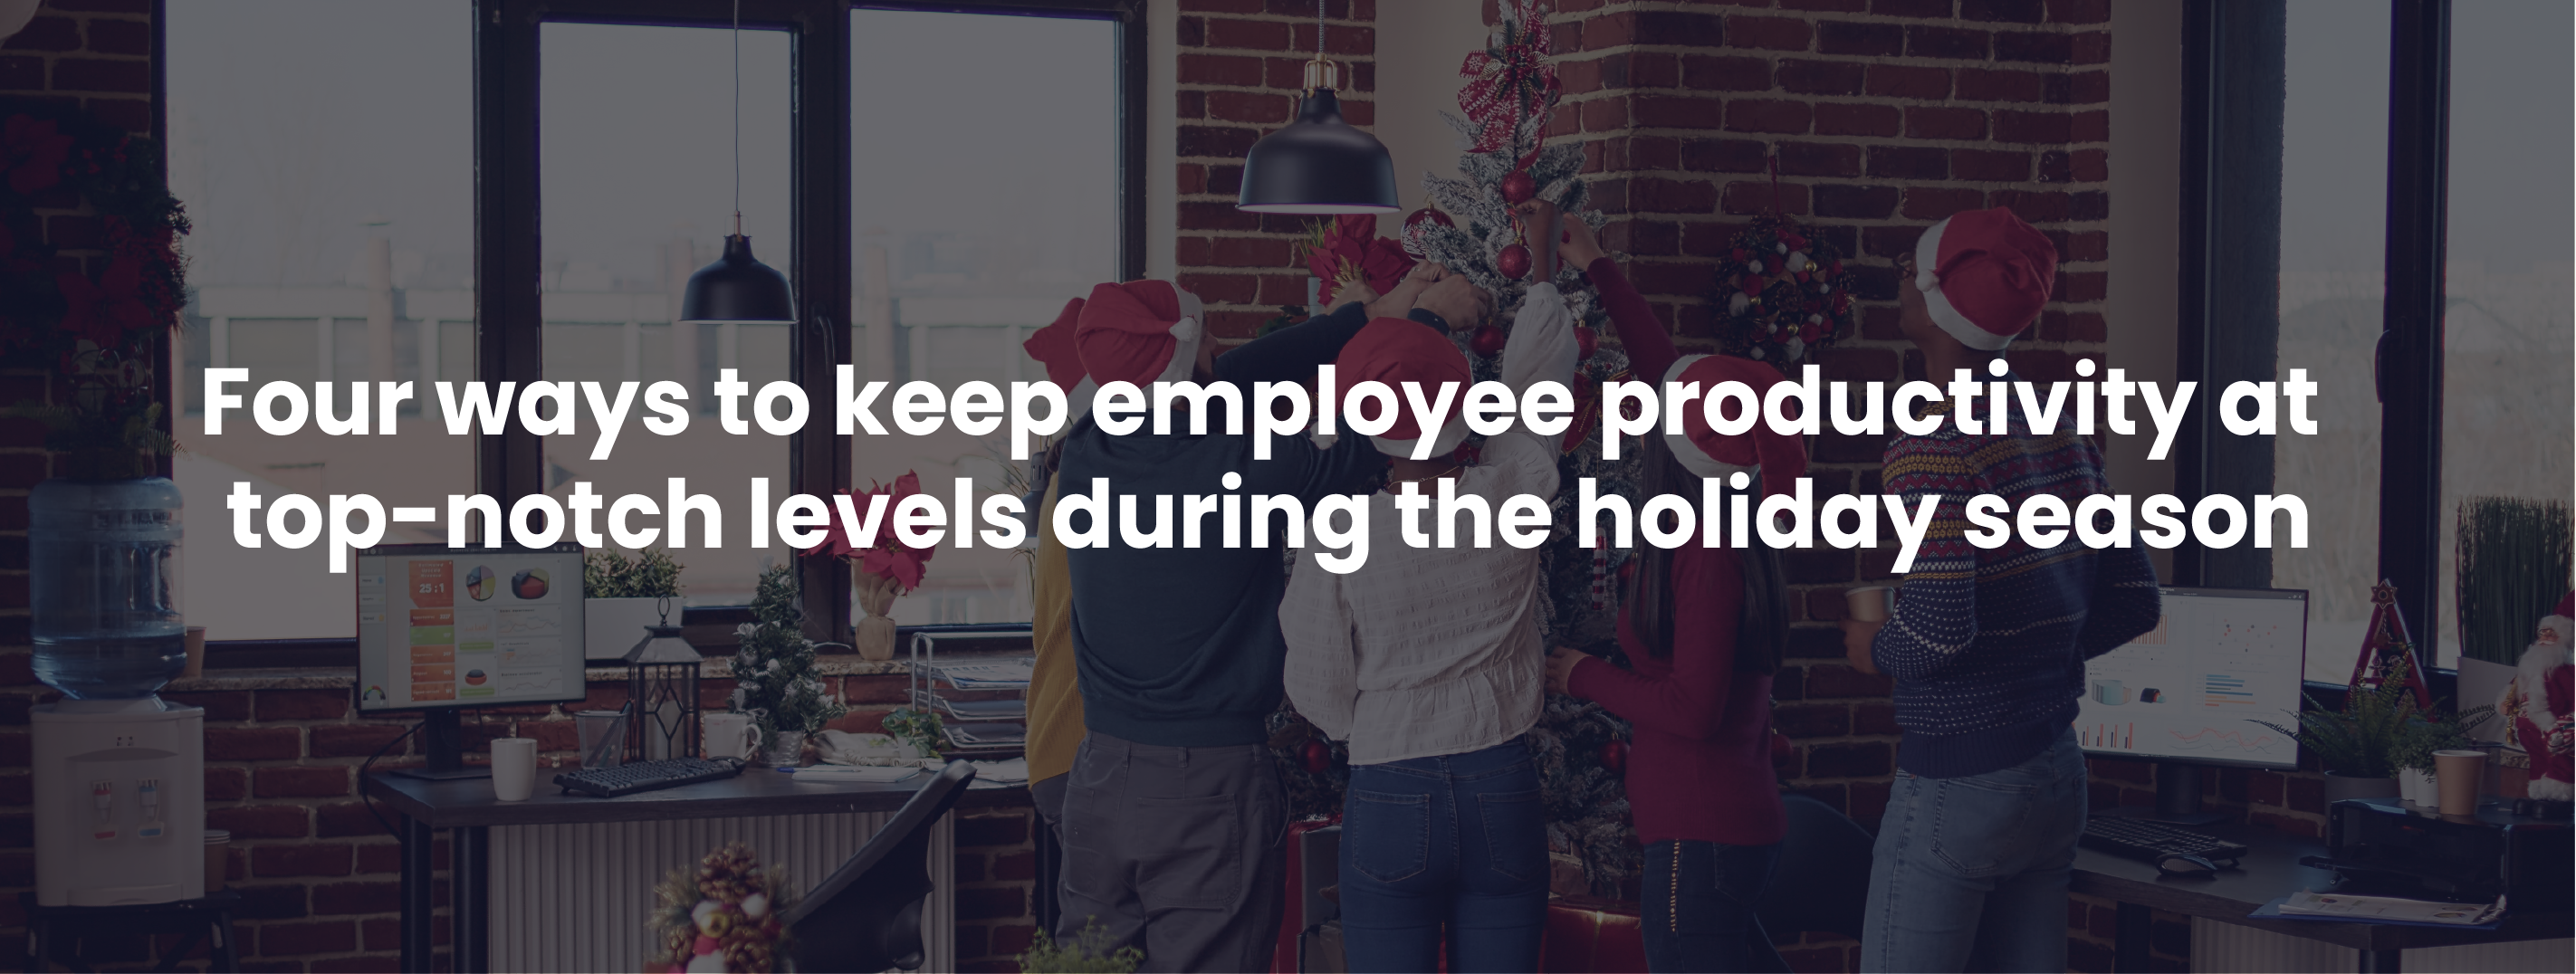 Four ways to keep employee productivity at top-notch levels during the holiday season